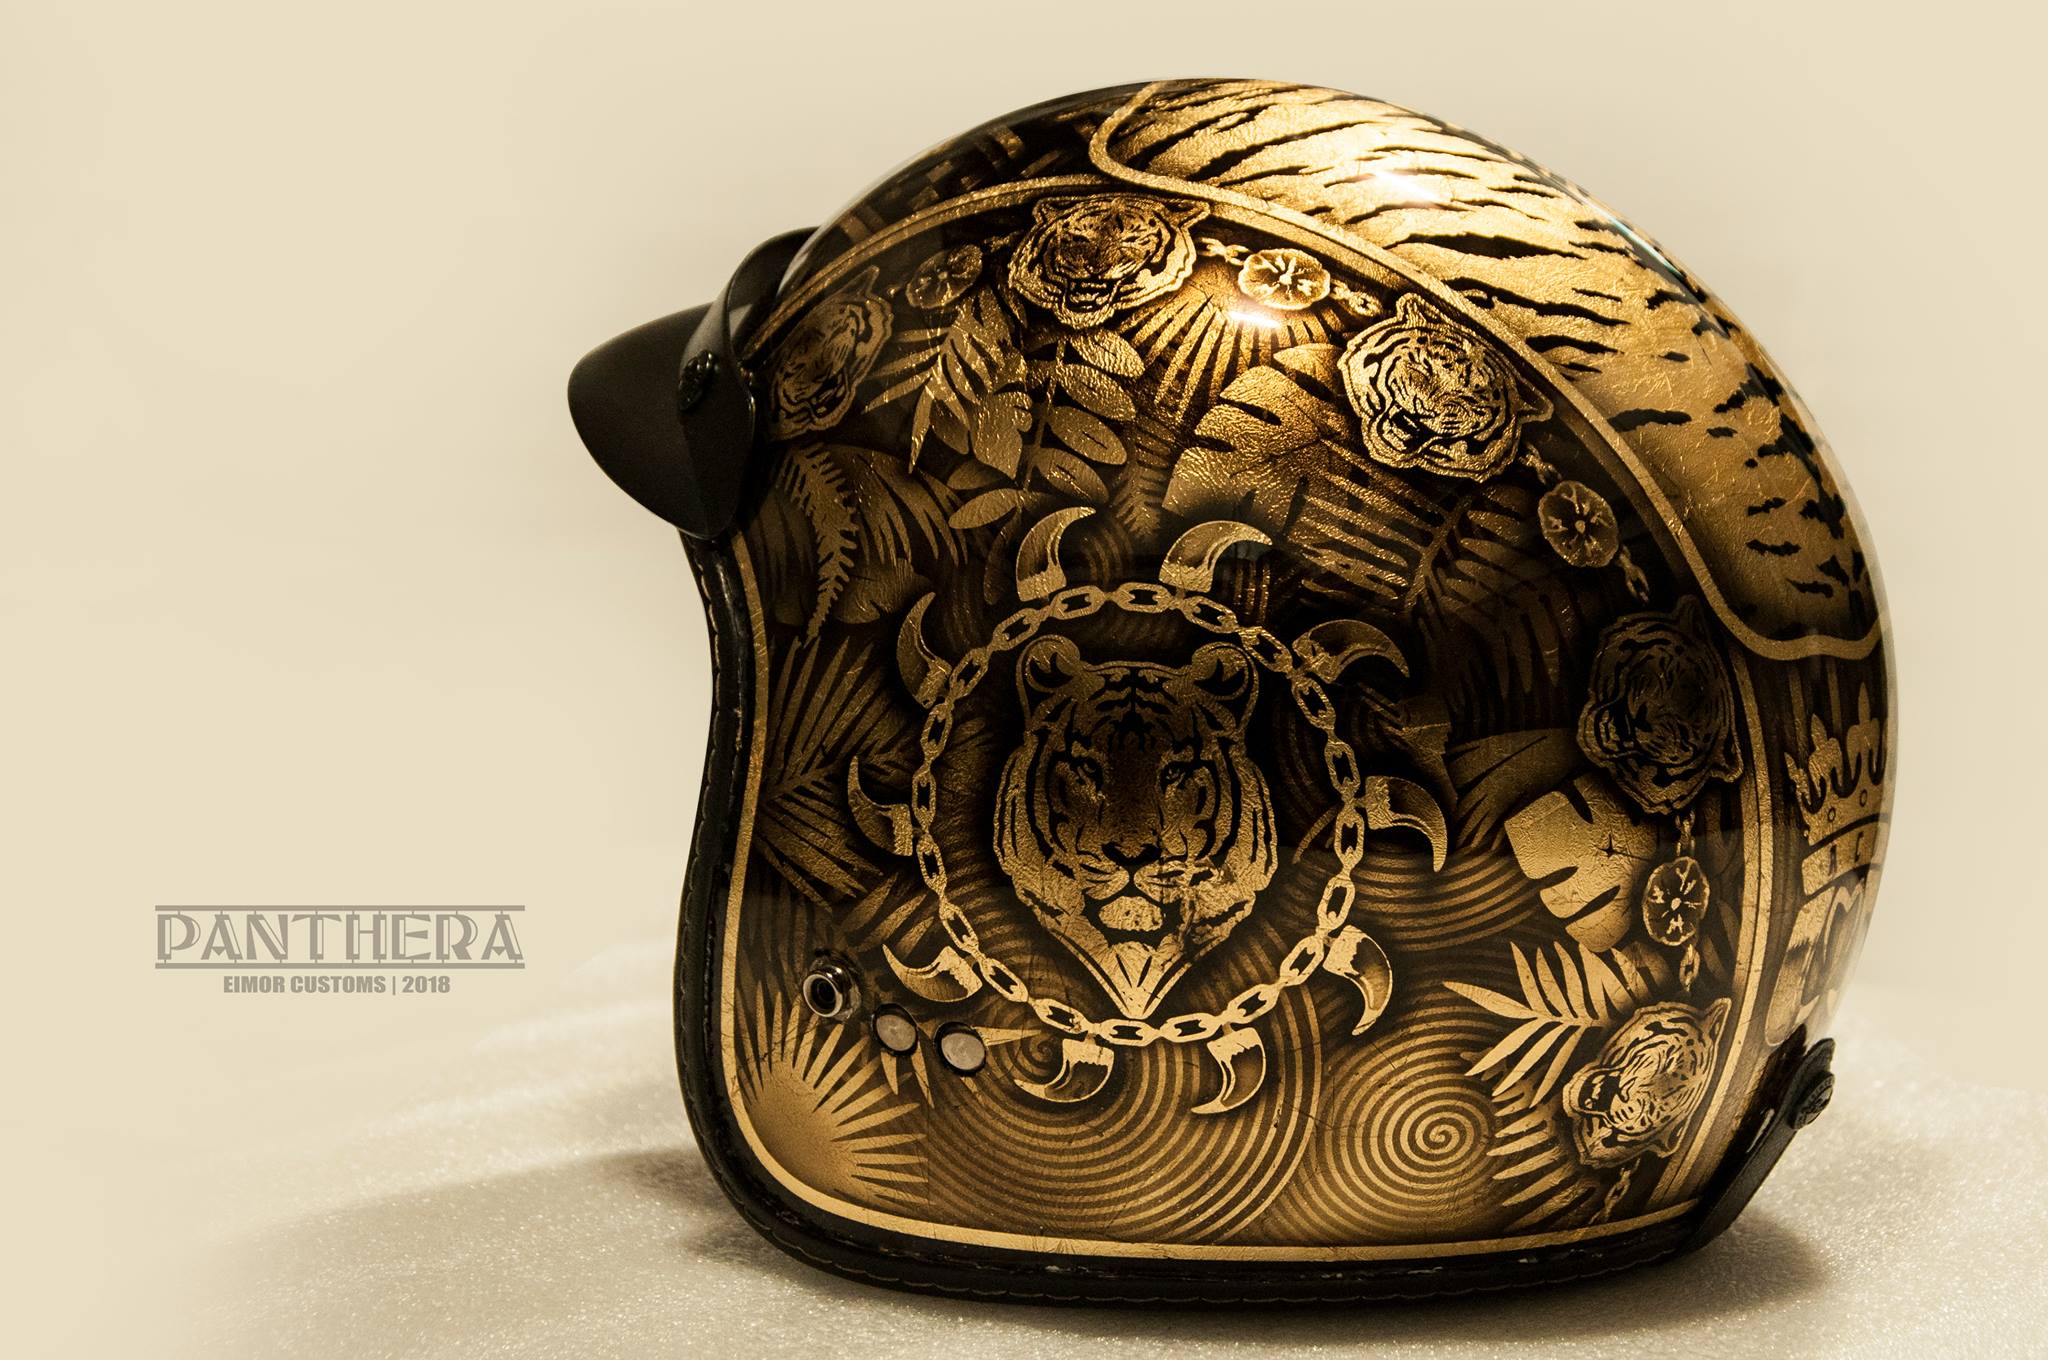 Top 10 Helmets by EIMOR - Black Panther, Breathe, The Lady Rider, Phantom, Captain America & More! - photograph